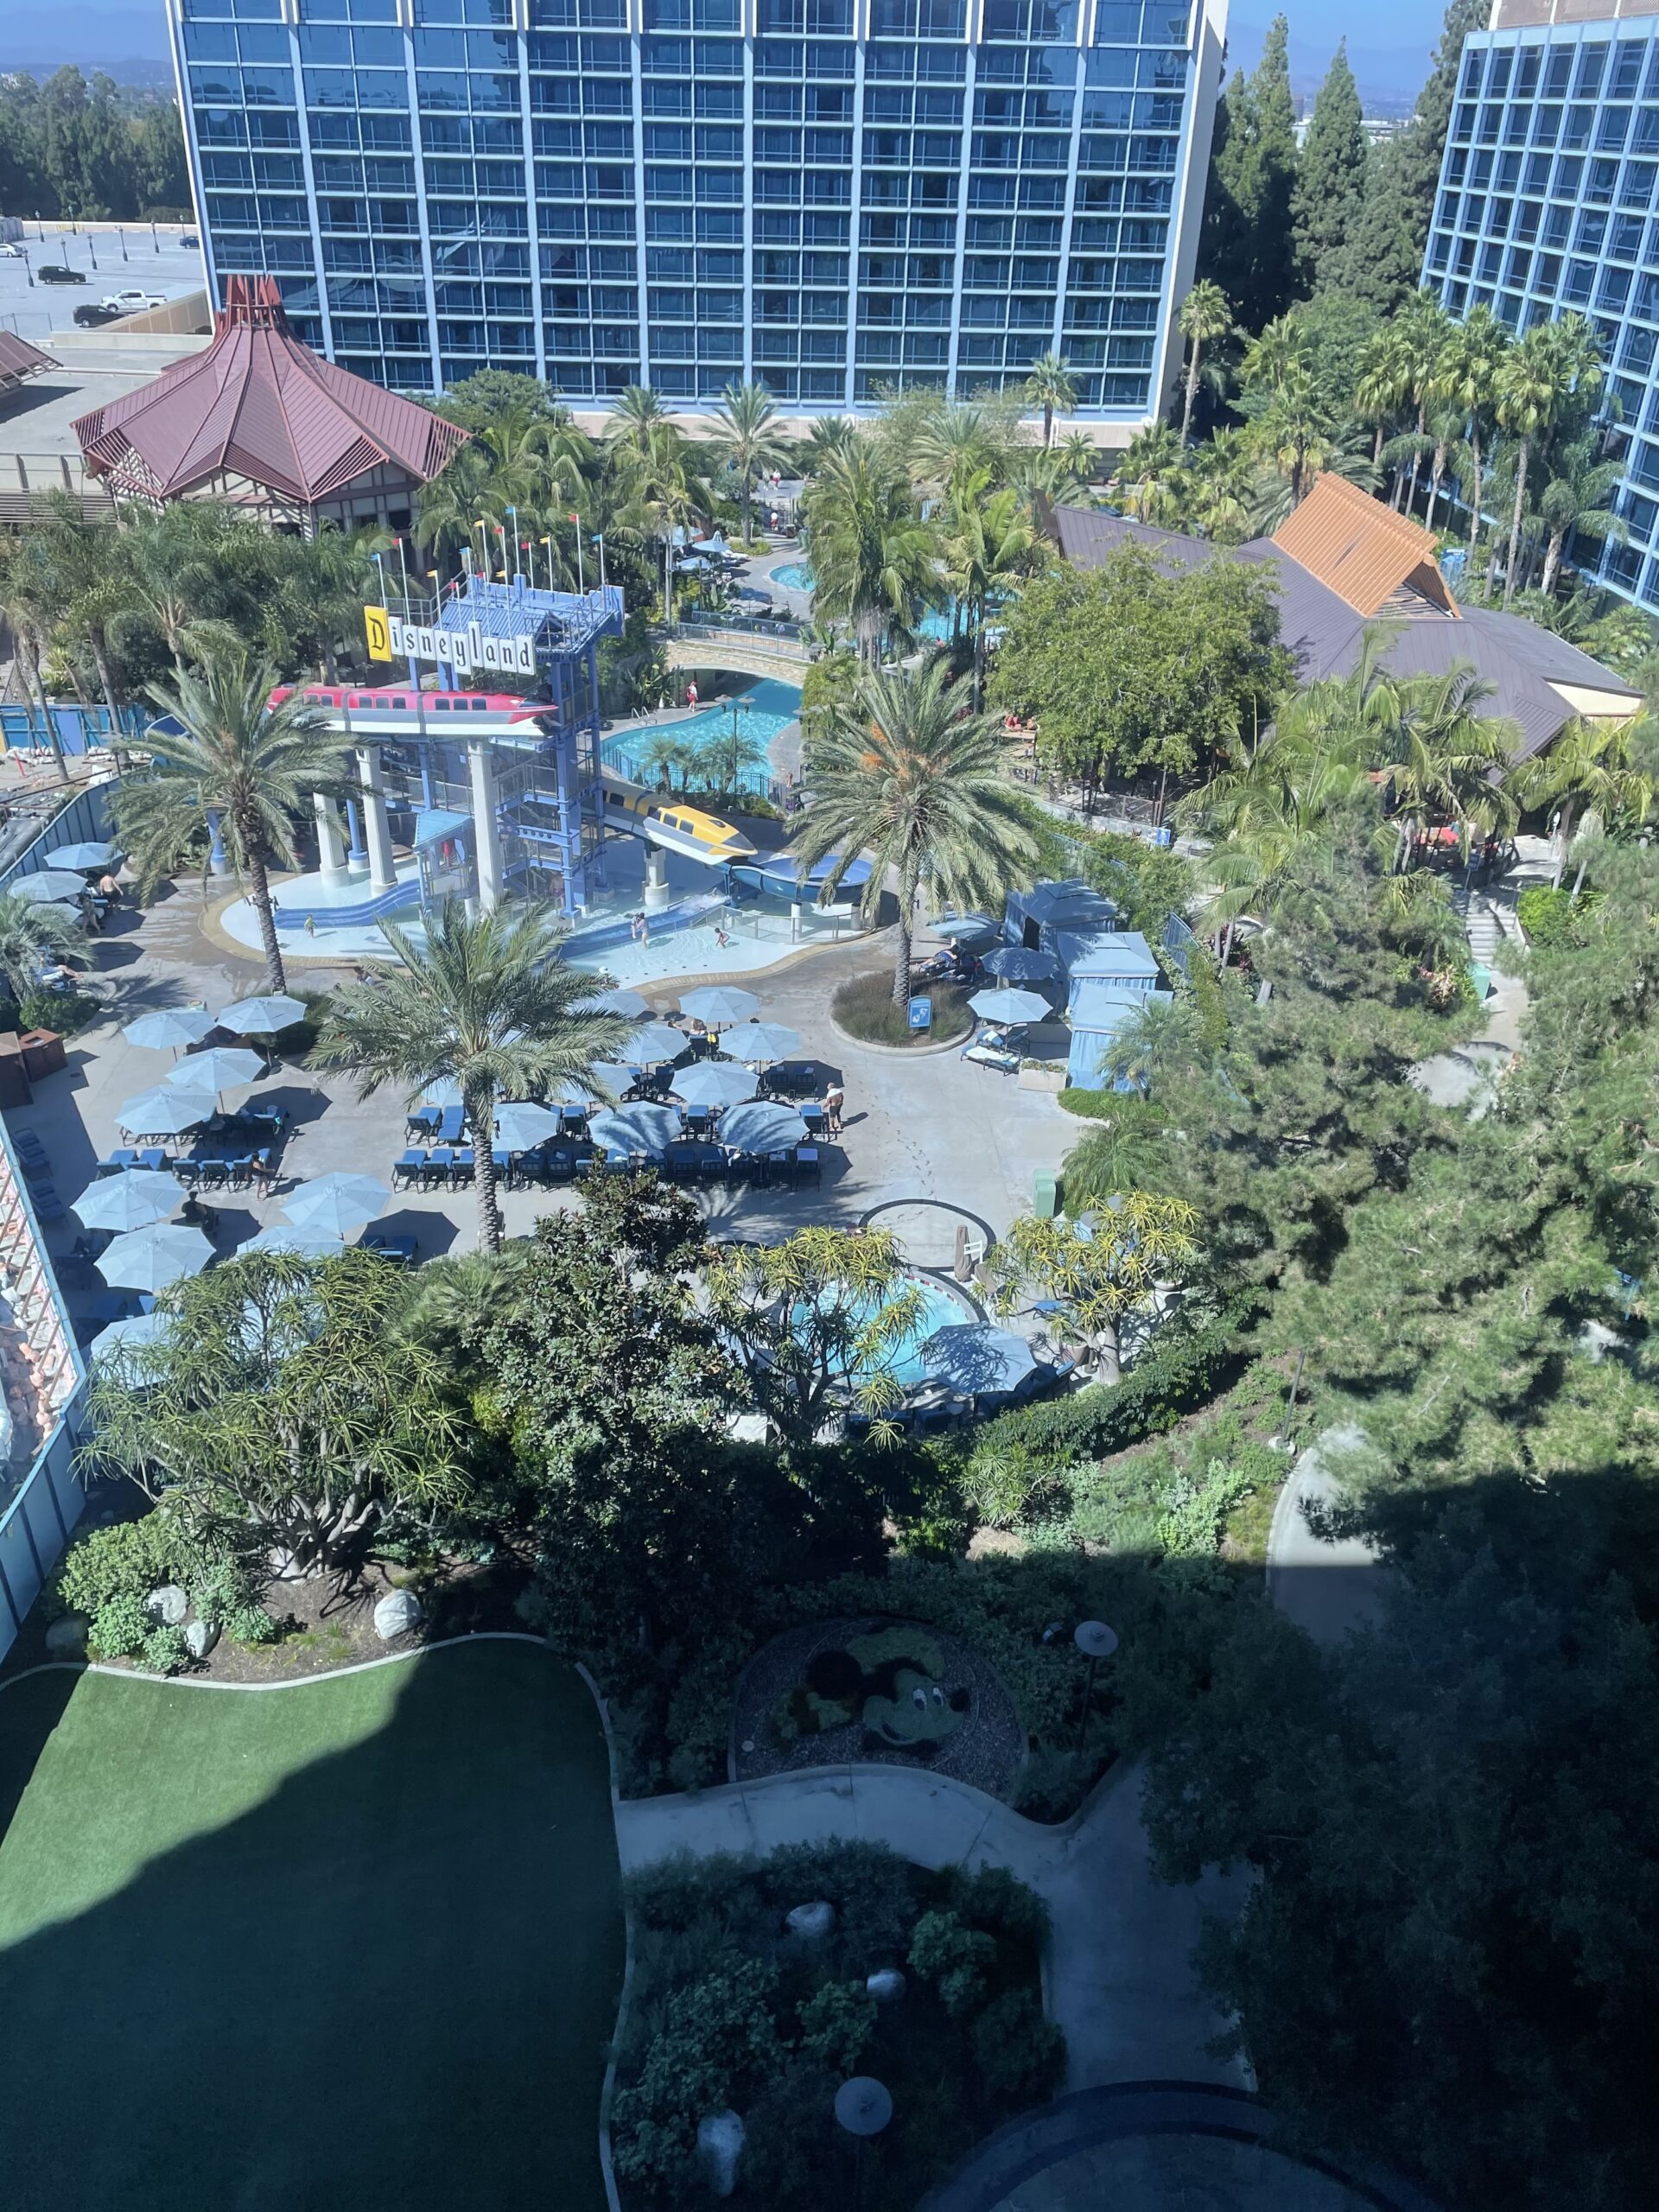 a view from a high window of the disneyland hotel pool area